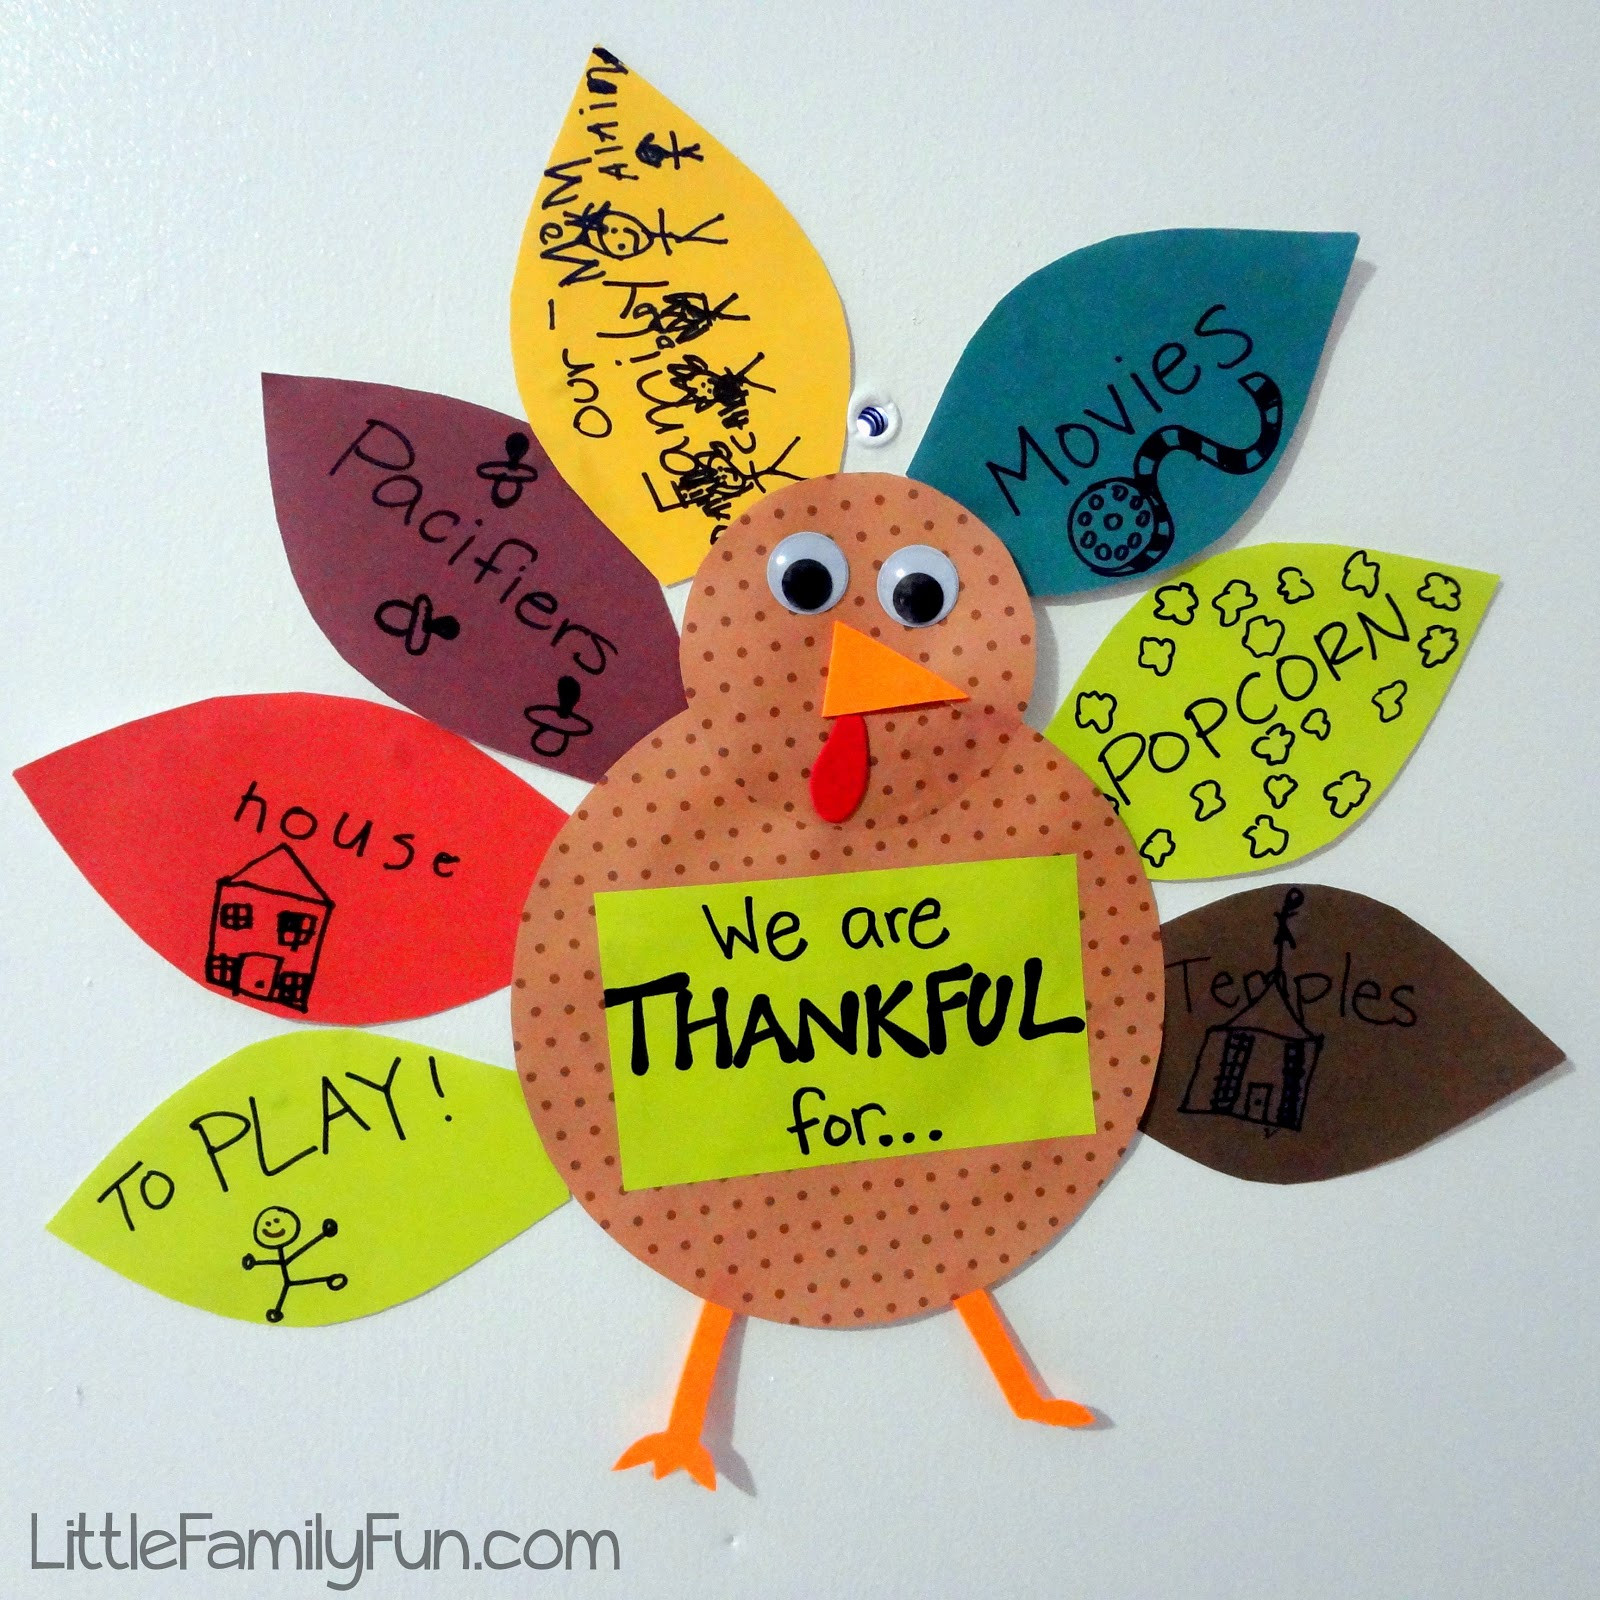 Thanksgiving Art Projects For Toddlers
 Gratitude Turkey 2012 Thanksgiving Tradition